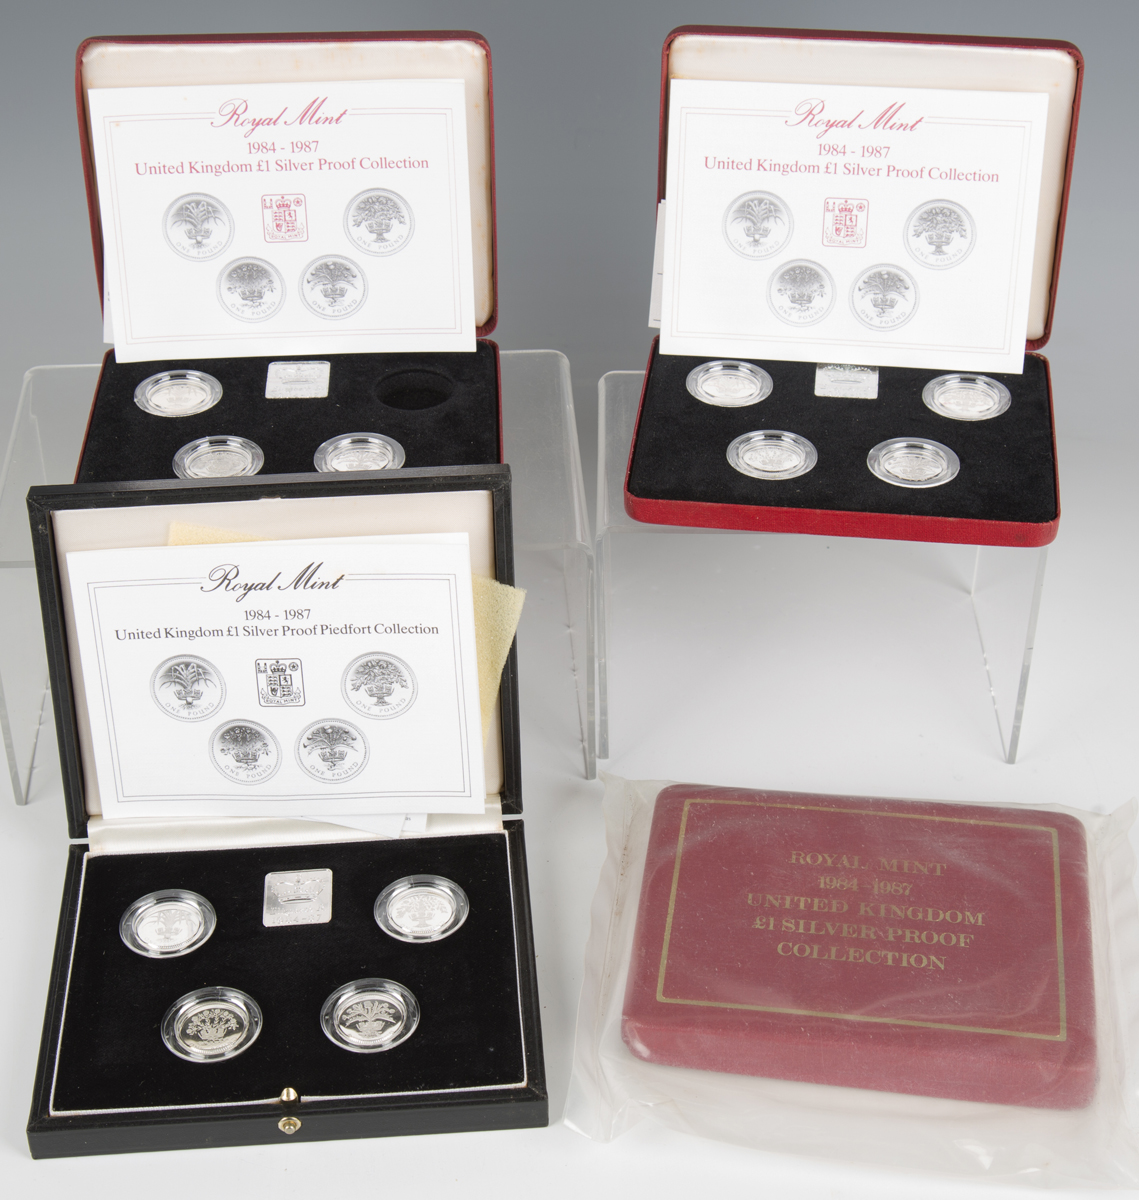 A Royal Mint 1984-1987 Silver Proof Piedfort Collection one pound four-coin set, cased with